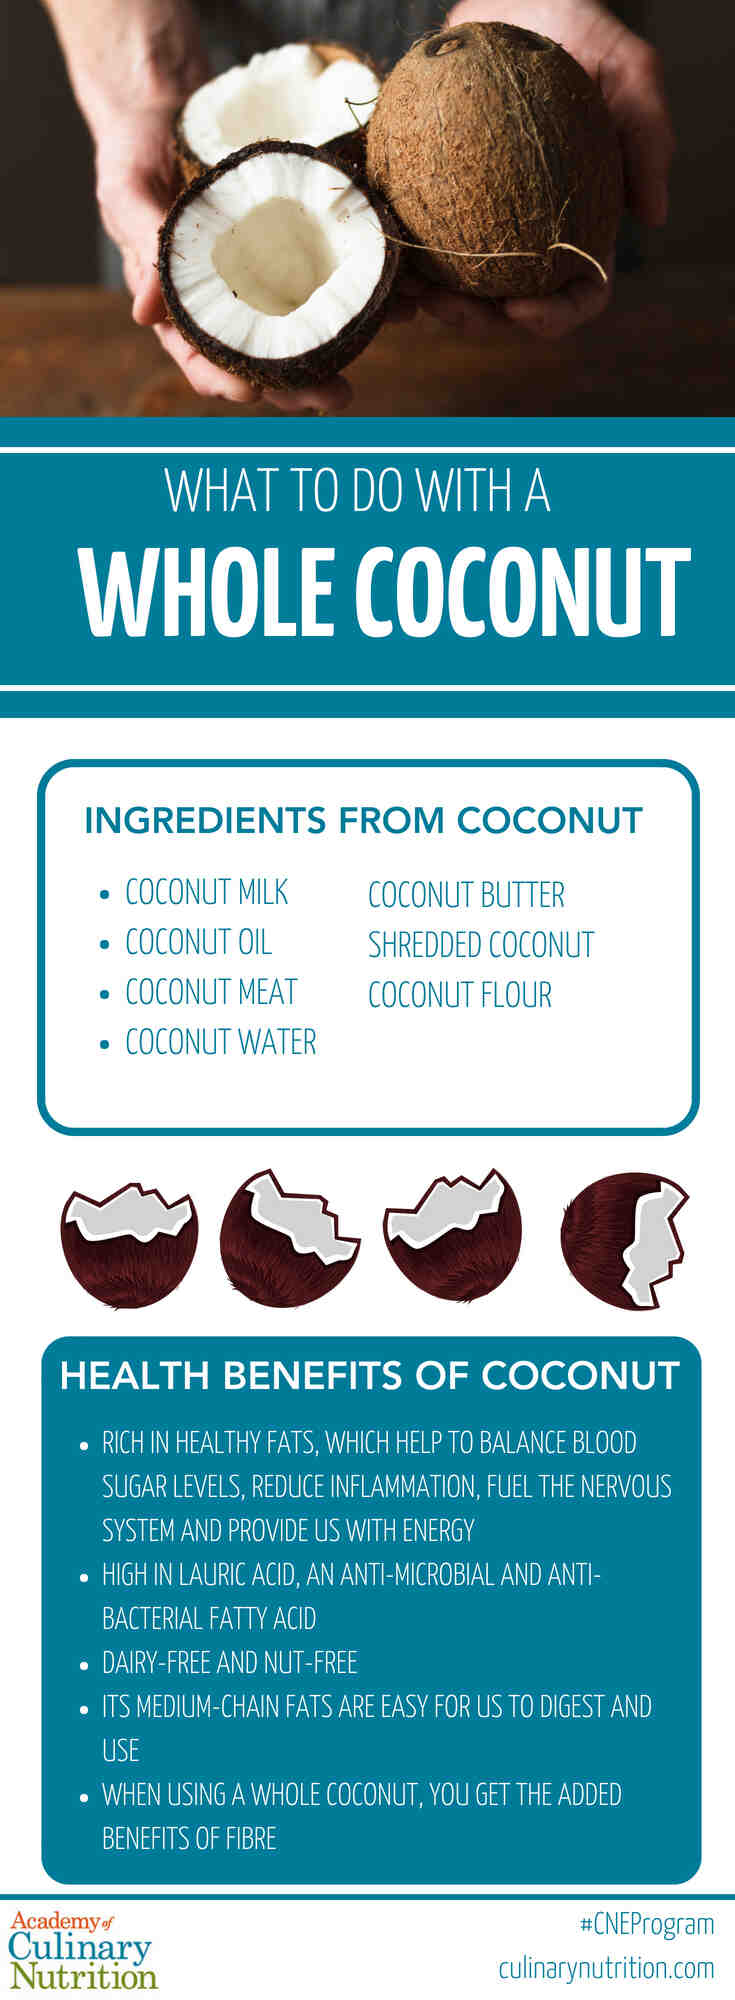 What can I do with fresh coconut?